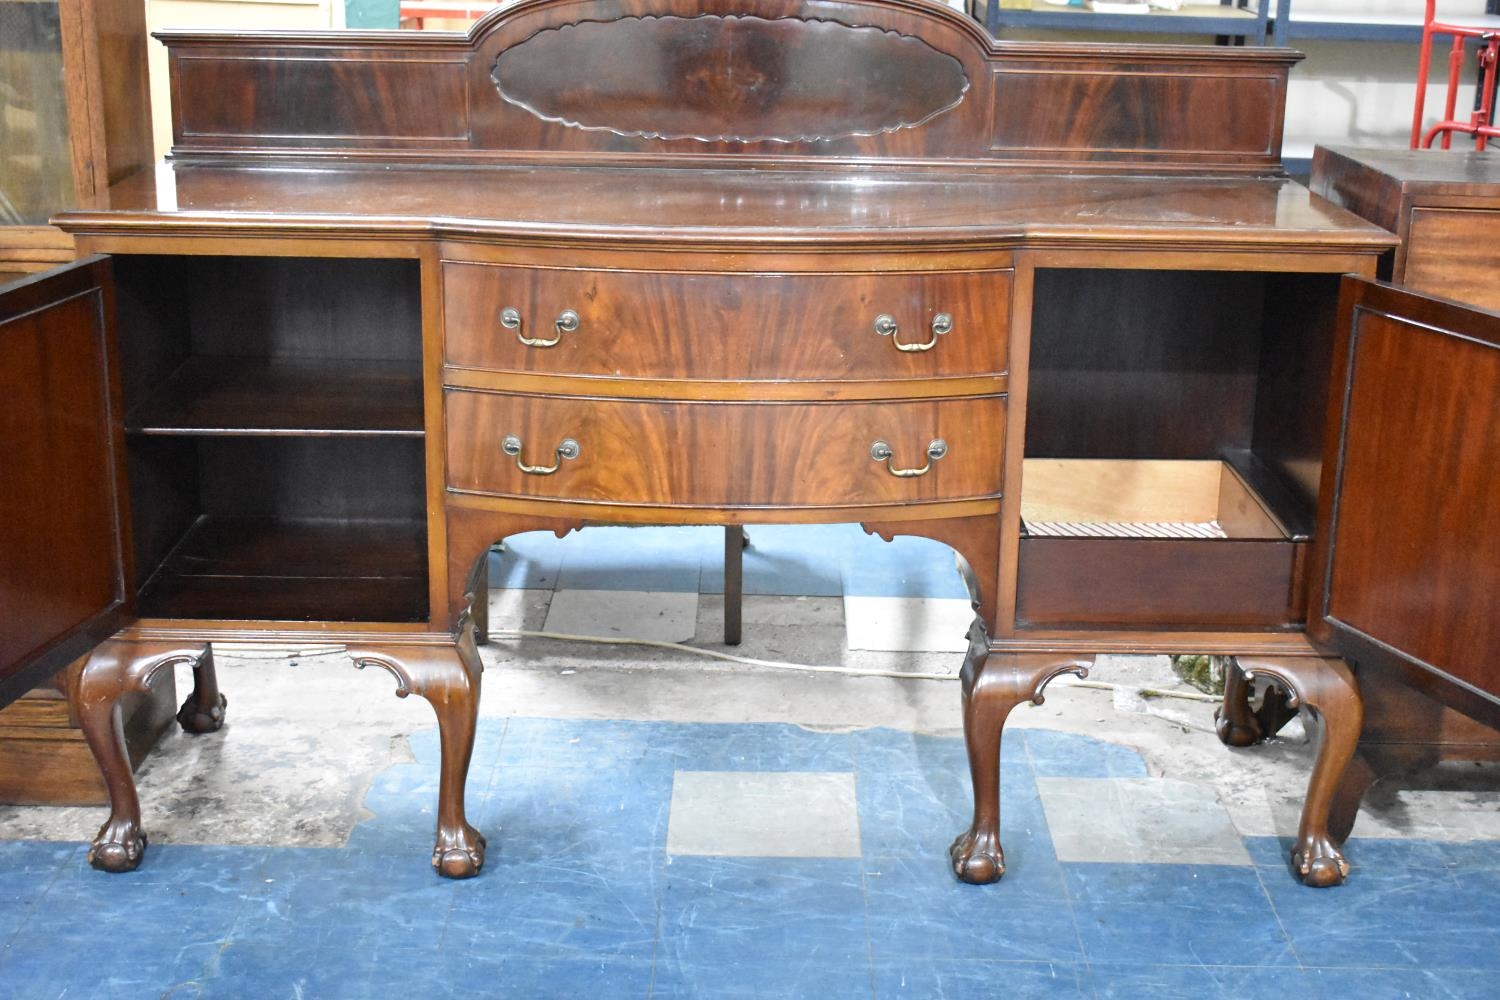 An Edwardian Mahogany Galleried Sideboard with Bowed Breakfront Having Cutlery Drawer and One Drawer - Image 2 of 4